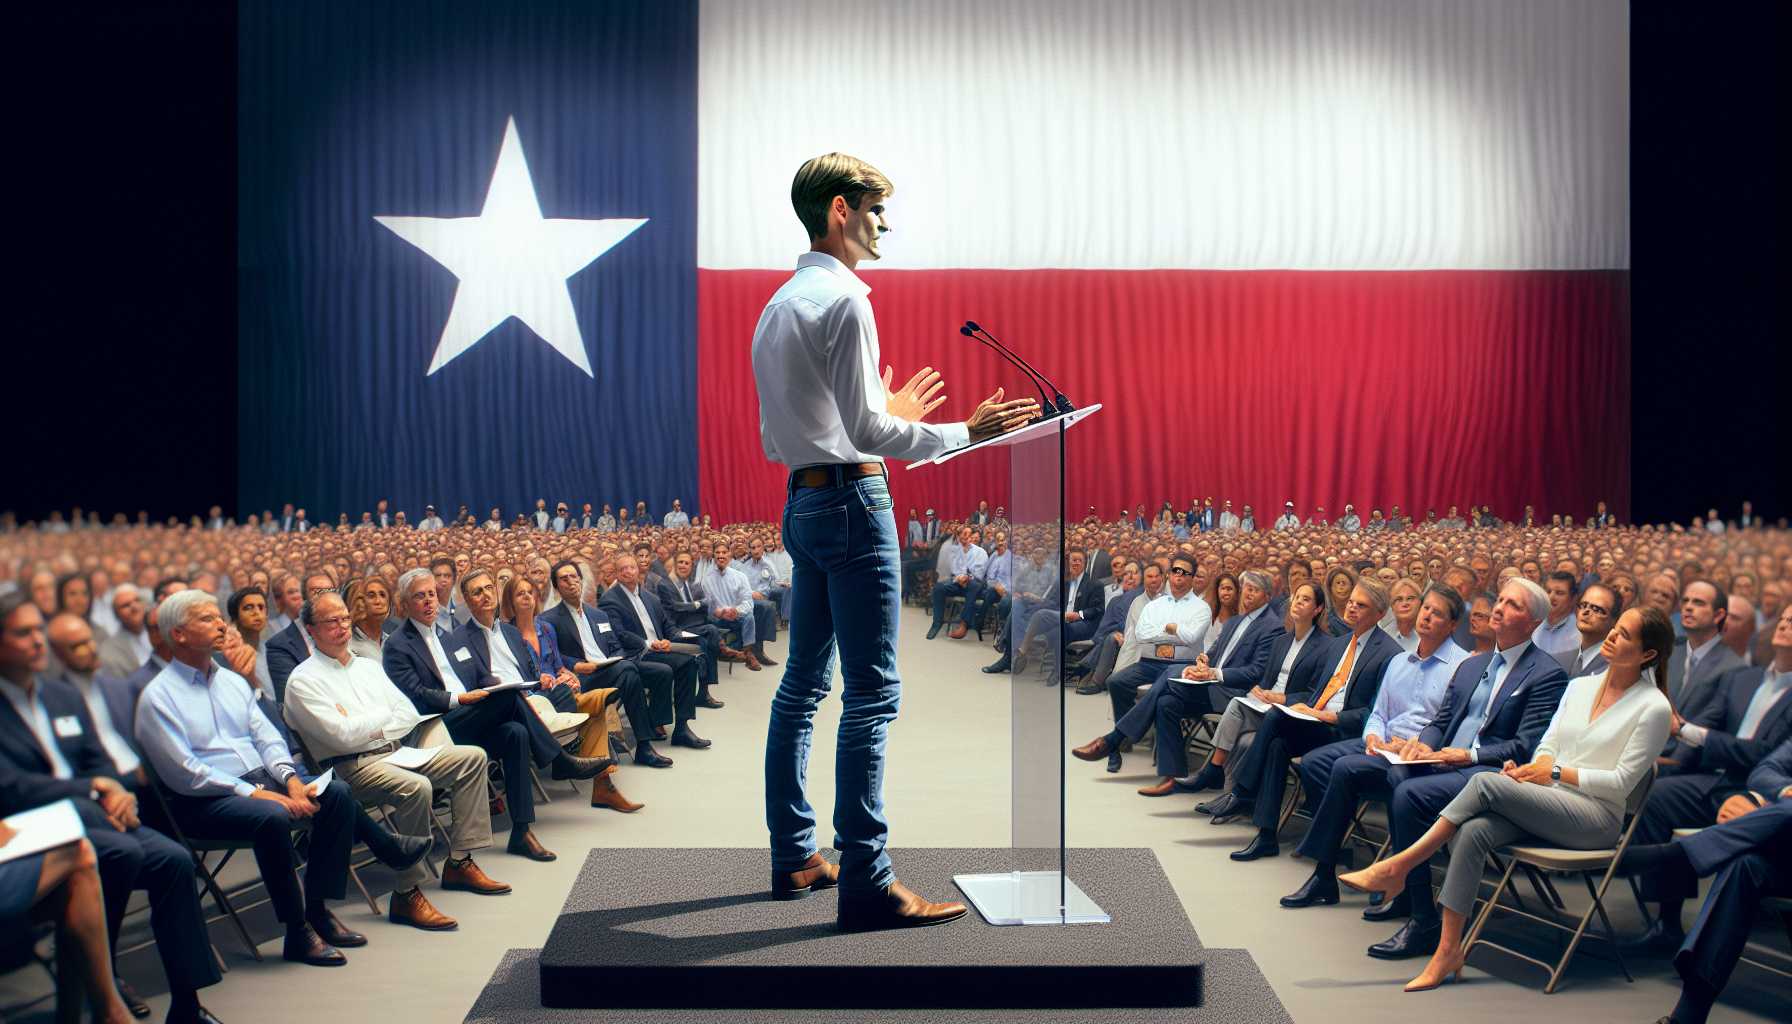 Elon Musk addressing Tesla shareholders at an annual meeting with Texas flag in the background